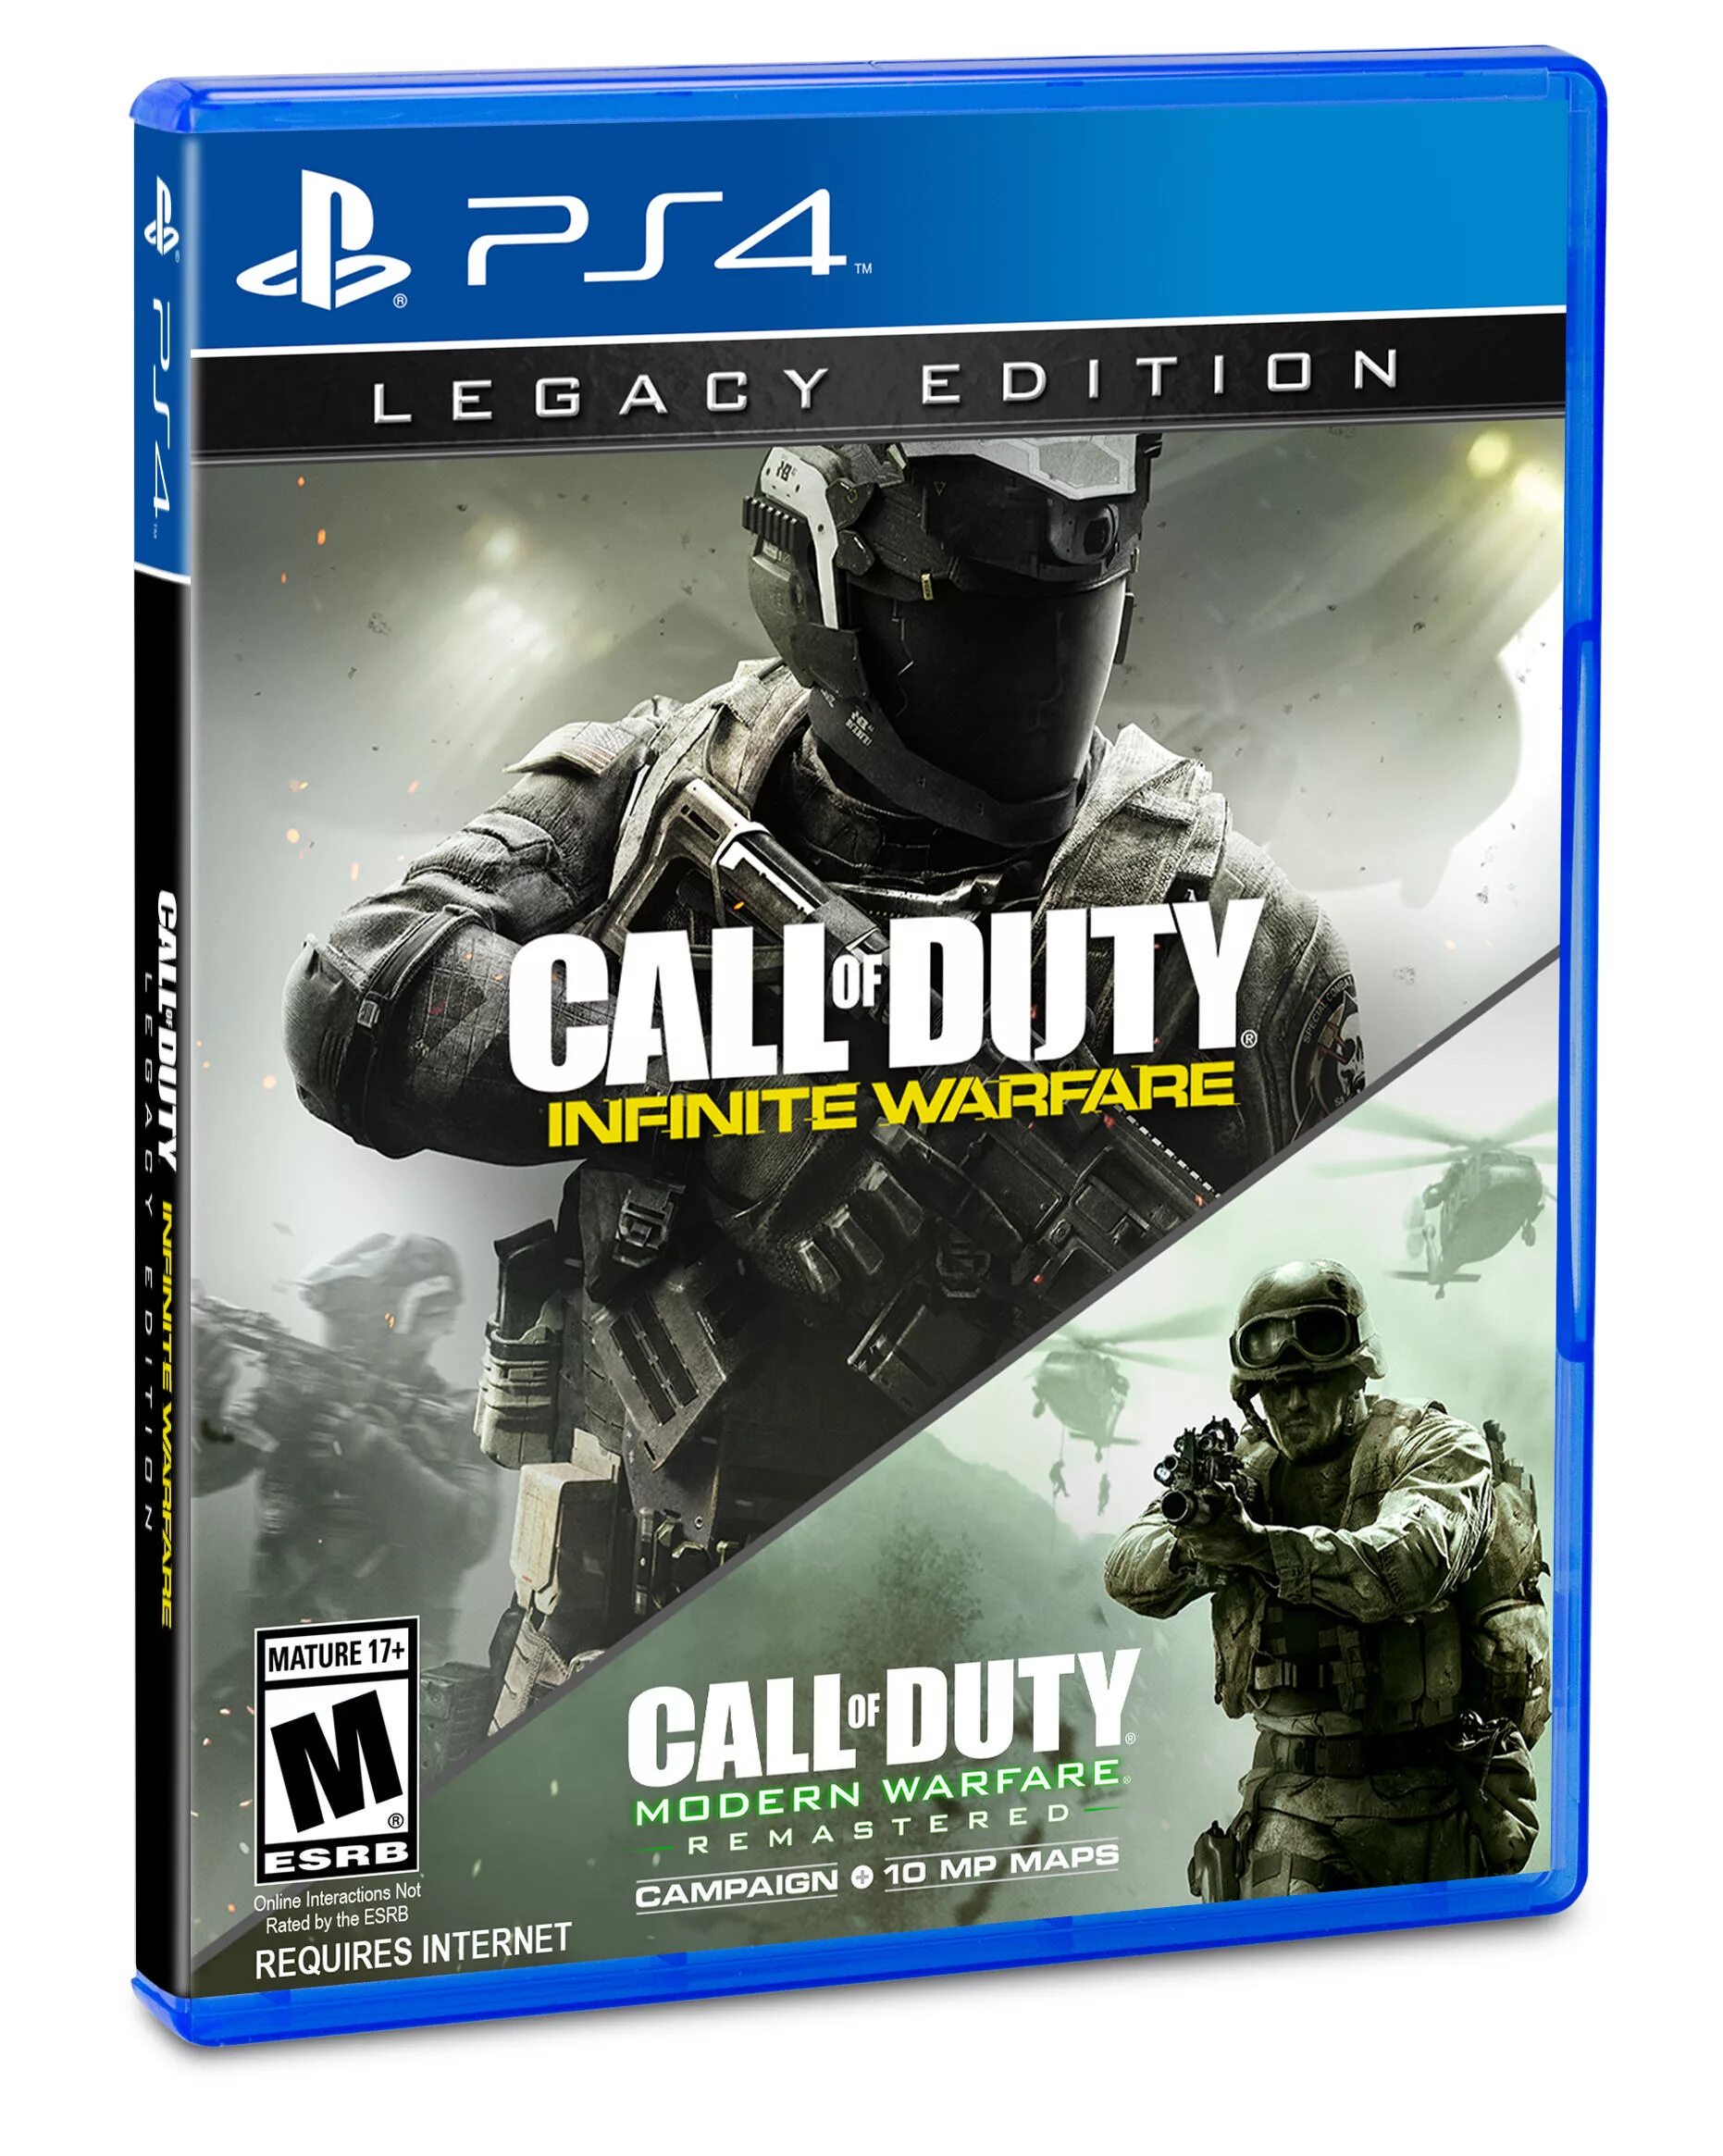 Call of duty ps5 купить. Call of Duty Legacy Edition ps4. Call of Duty Infinite Warfare ps4. Call of Duty Infinity Warfare ps4. Call of Duty Infinite Warfare Legacy Edition.